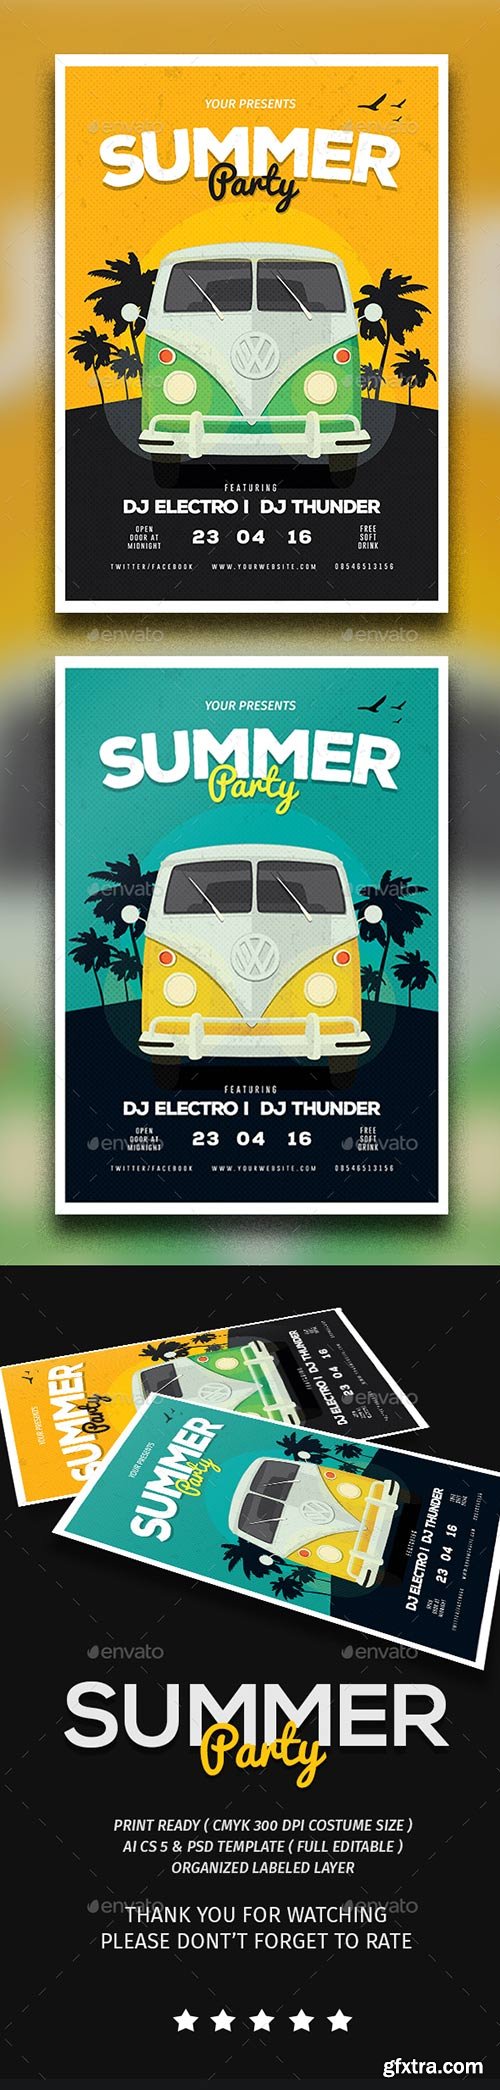 Graphicriver - Summer Party 15649515